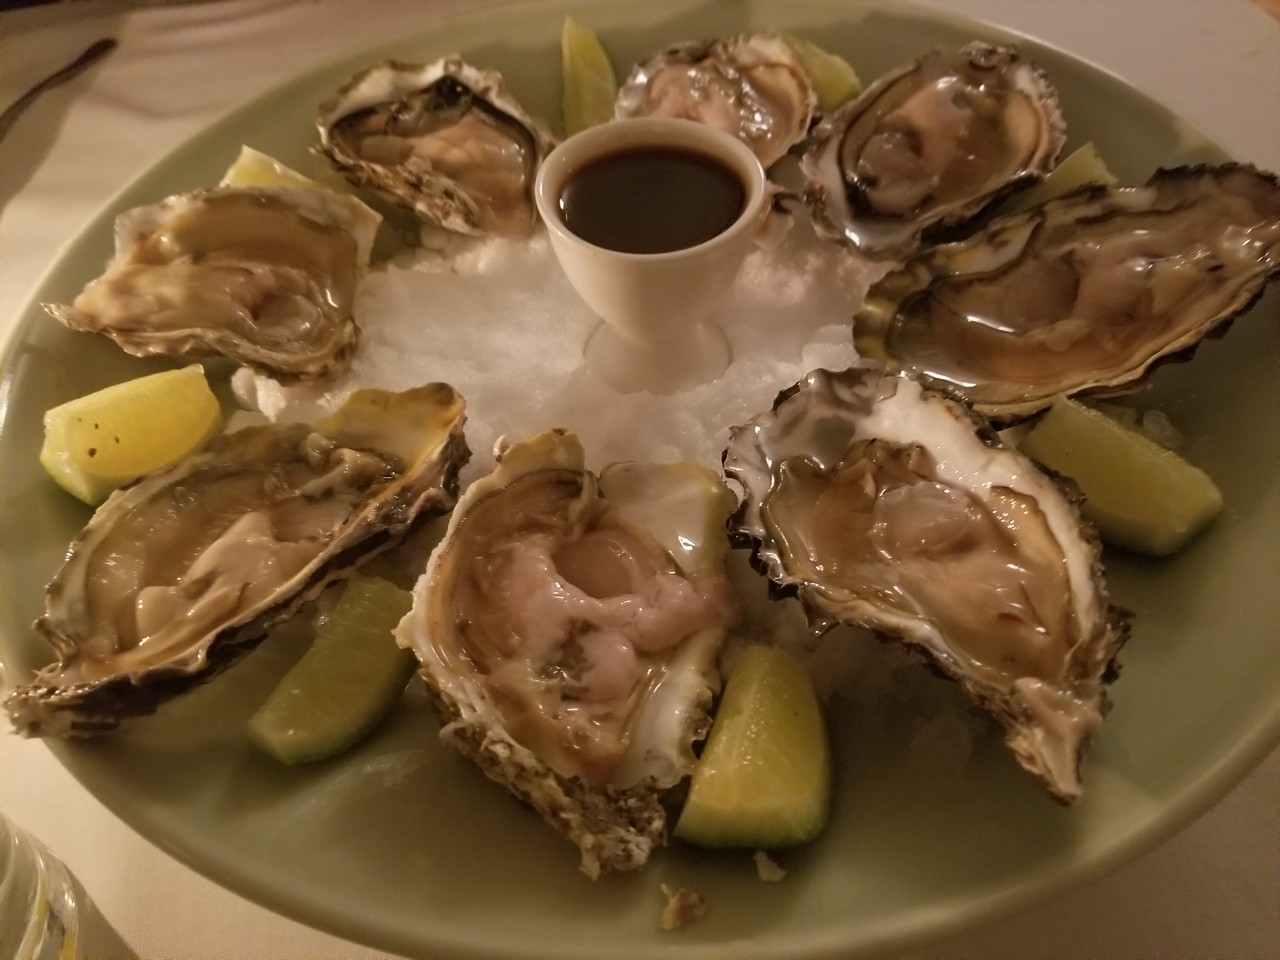 a plate of oysters and lemons